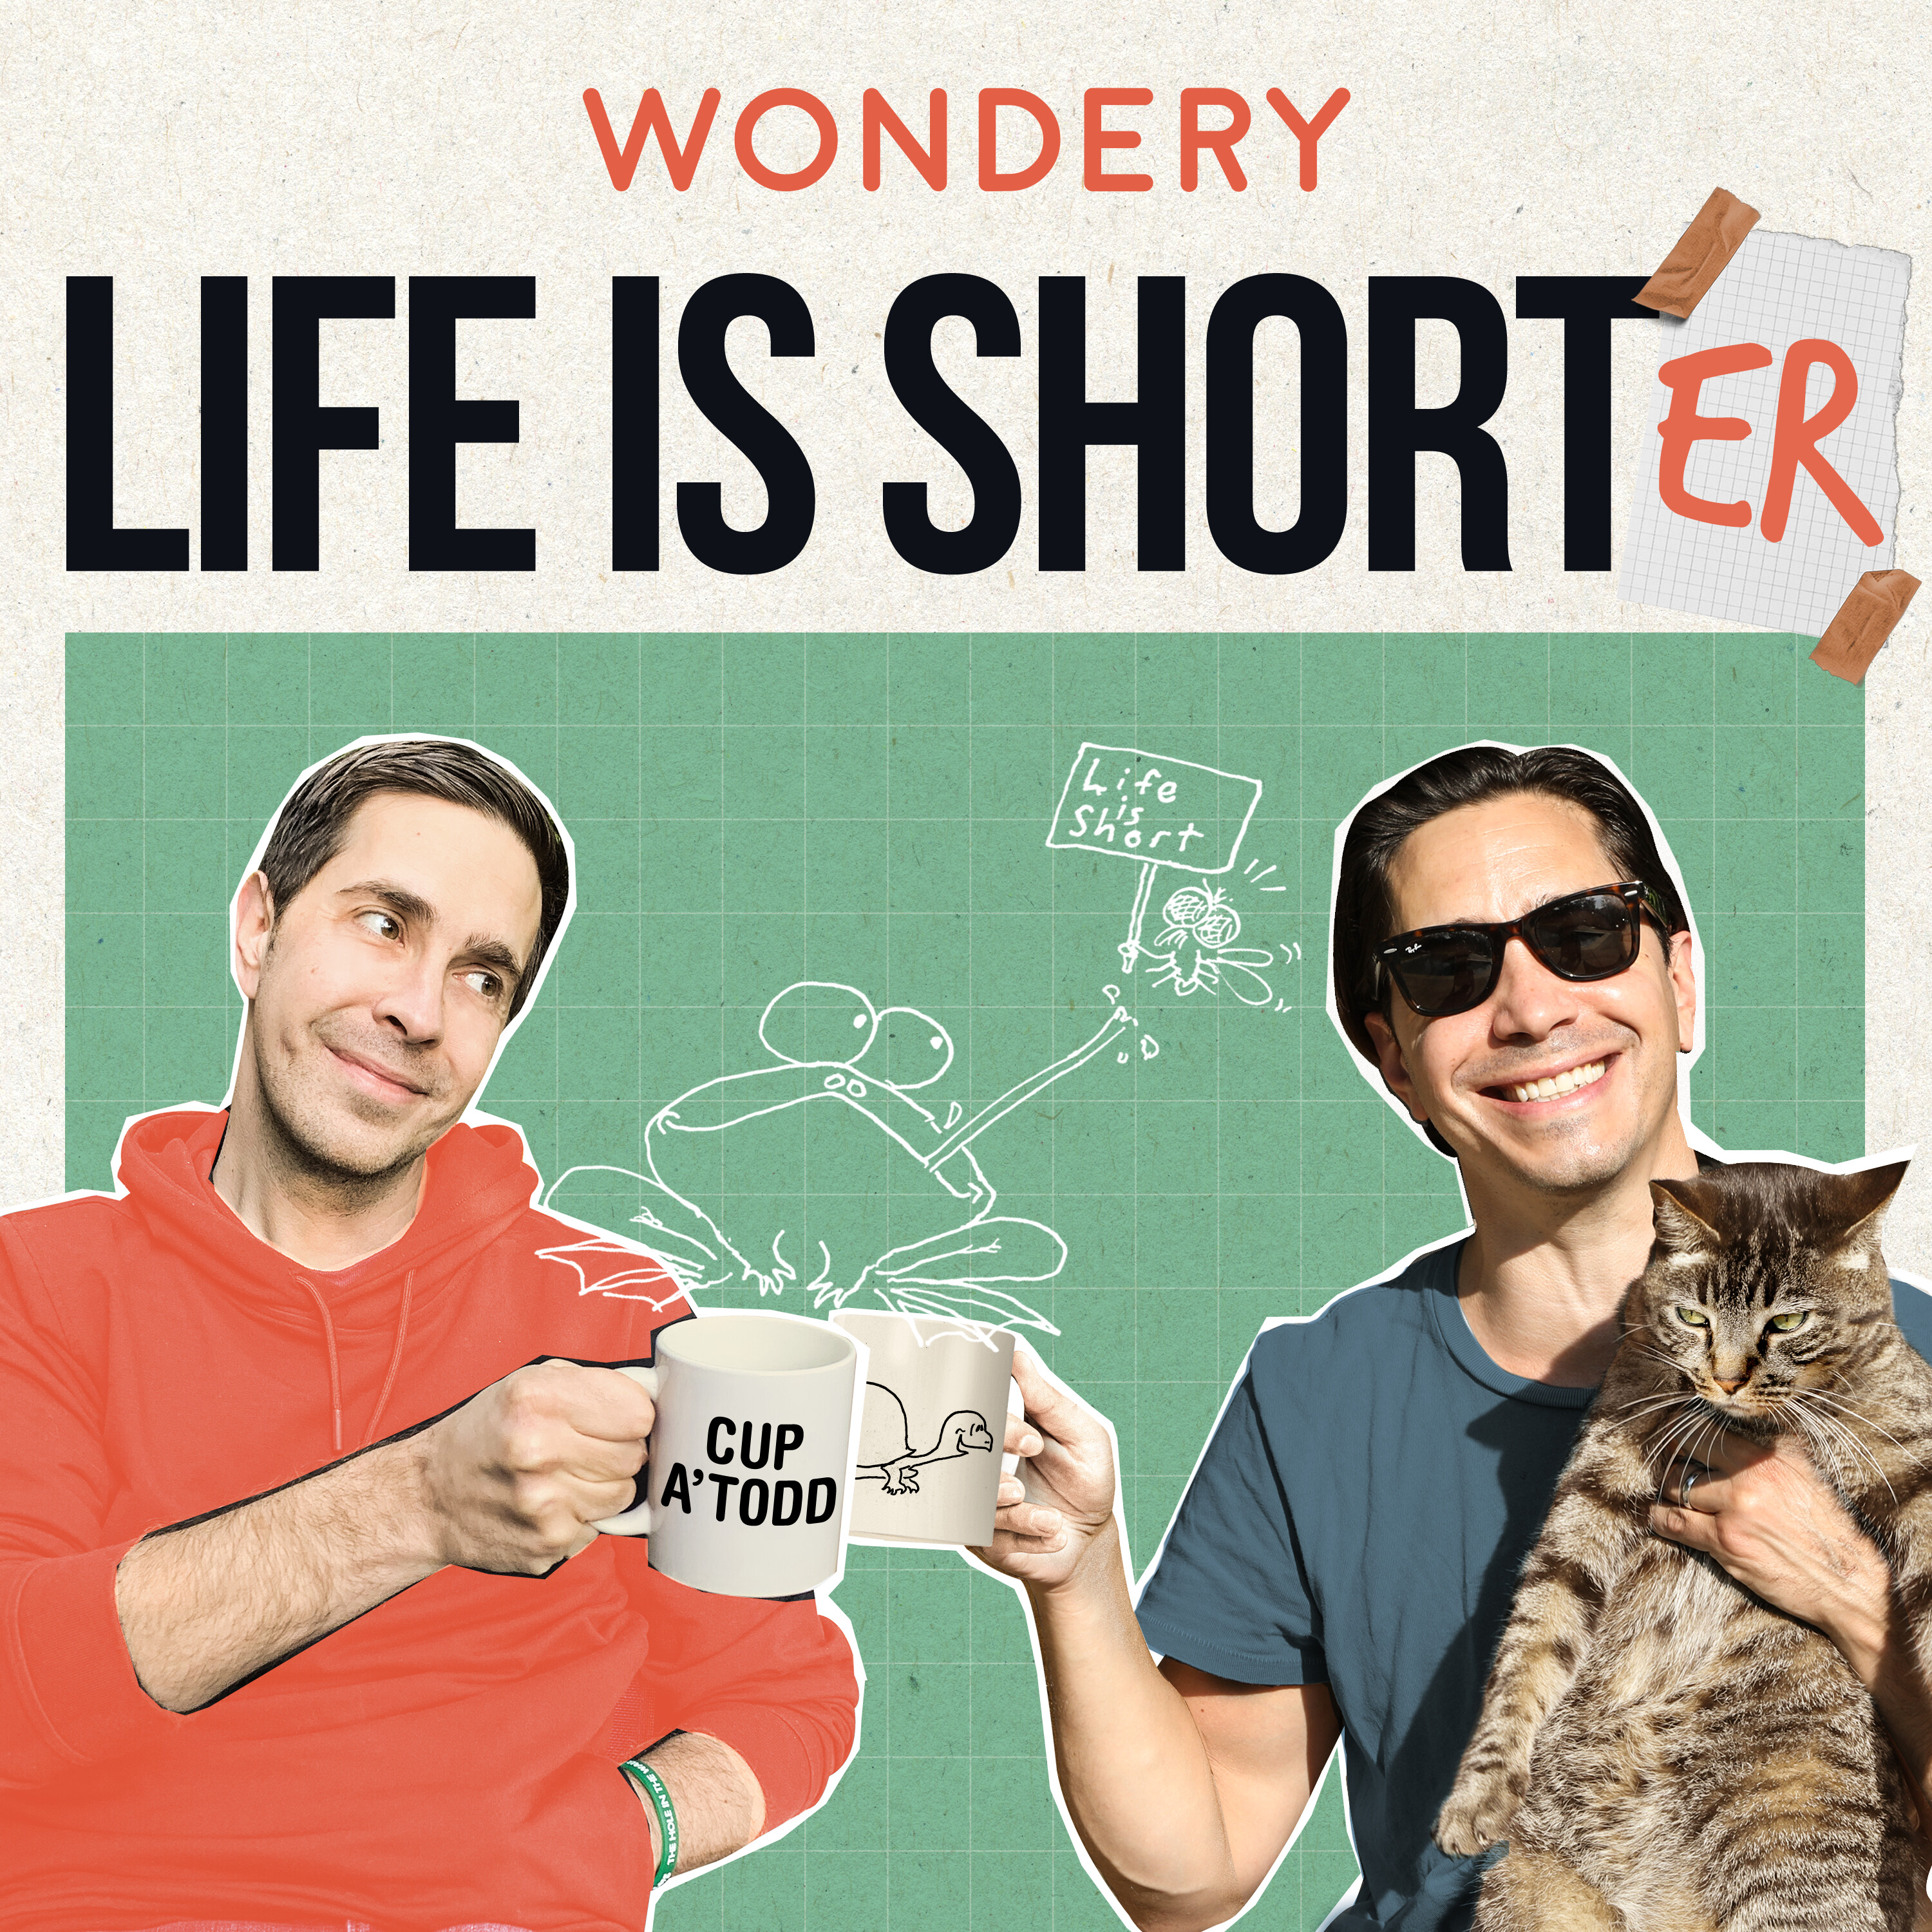 Life Is Short(er): Jerry O, Shouty Family, and Senseless Banter 🥳 by Wondery